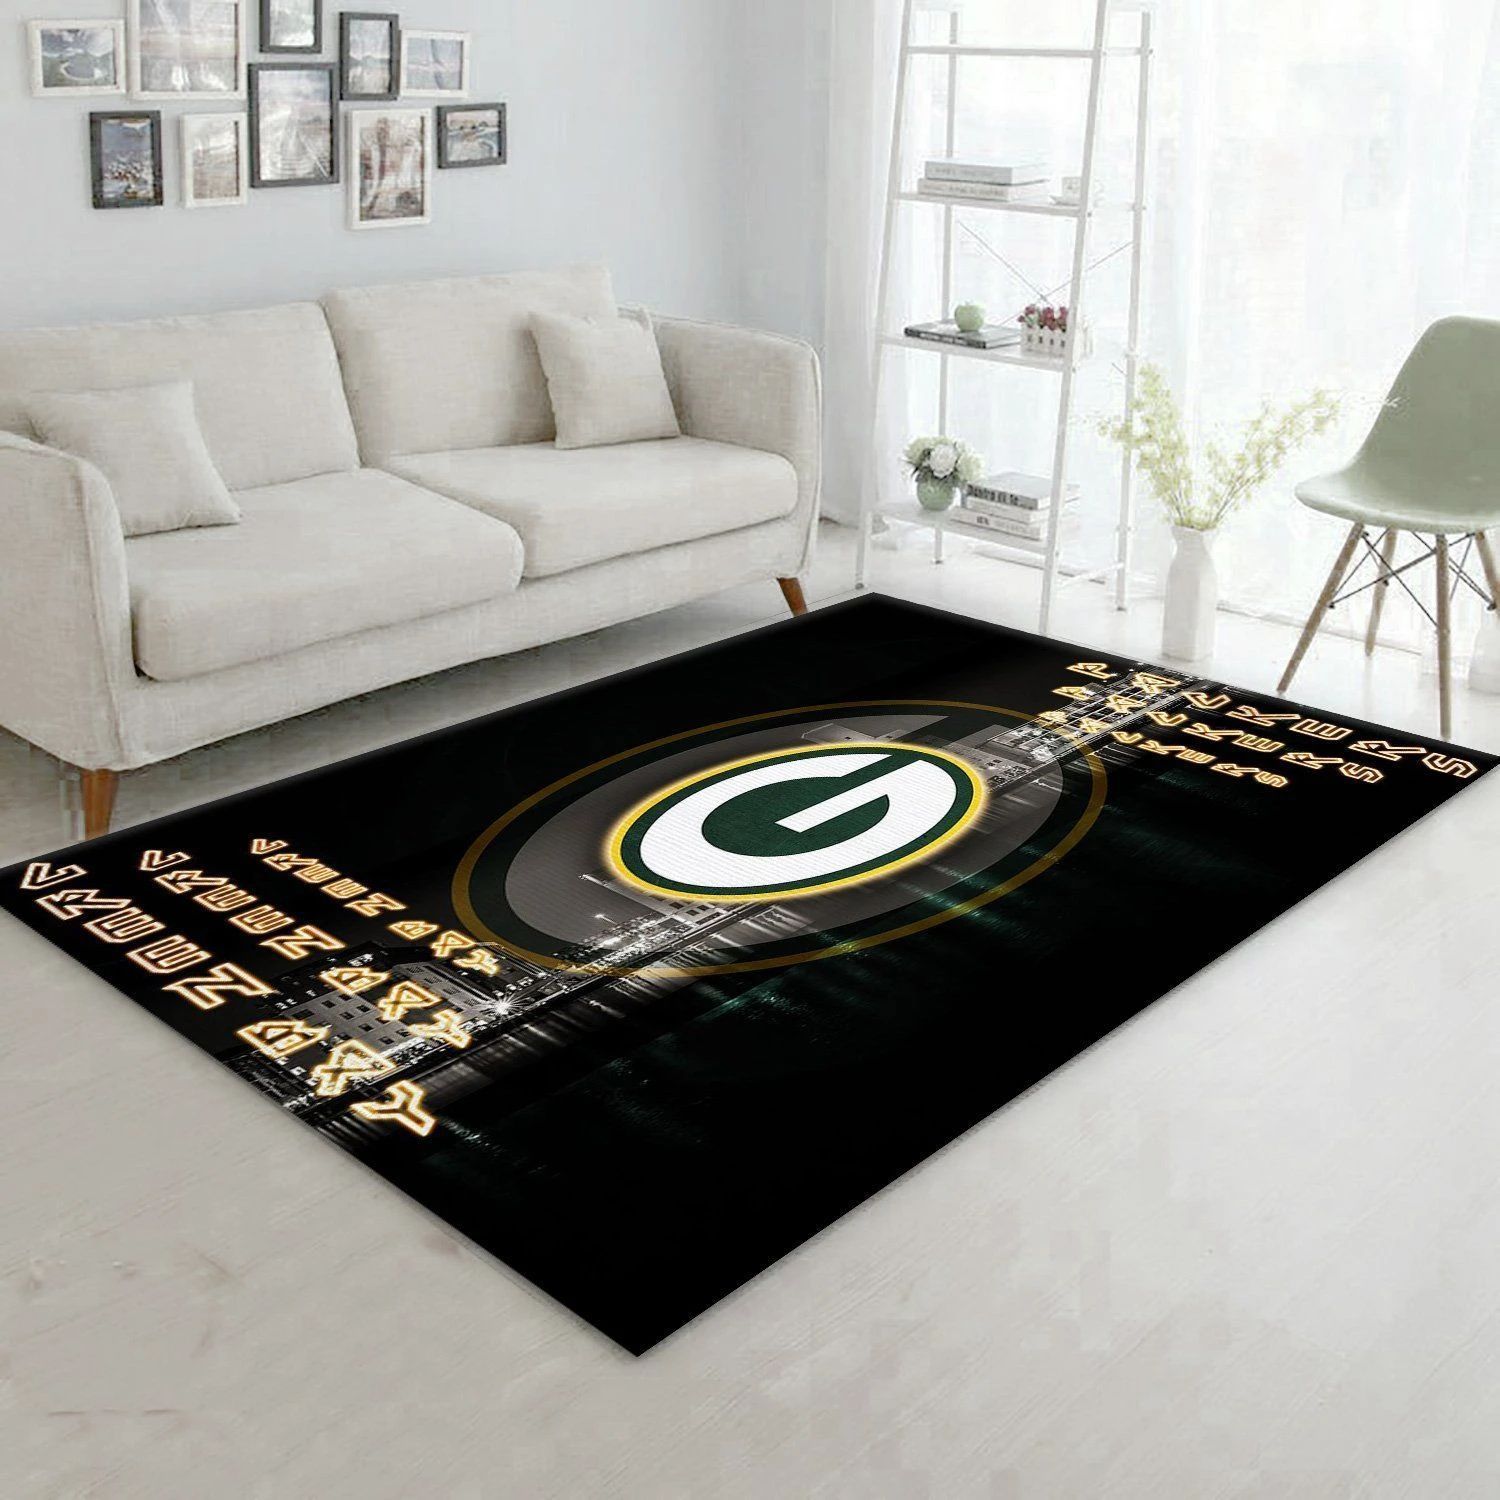 Green Bay Packers Nfl Area Rug For Christmas Bedroom Rug US Gift Decor - Indoor Outdoor Rugs